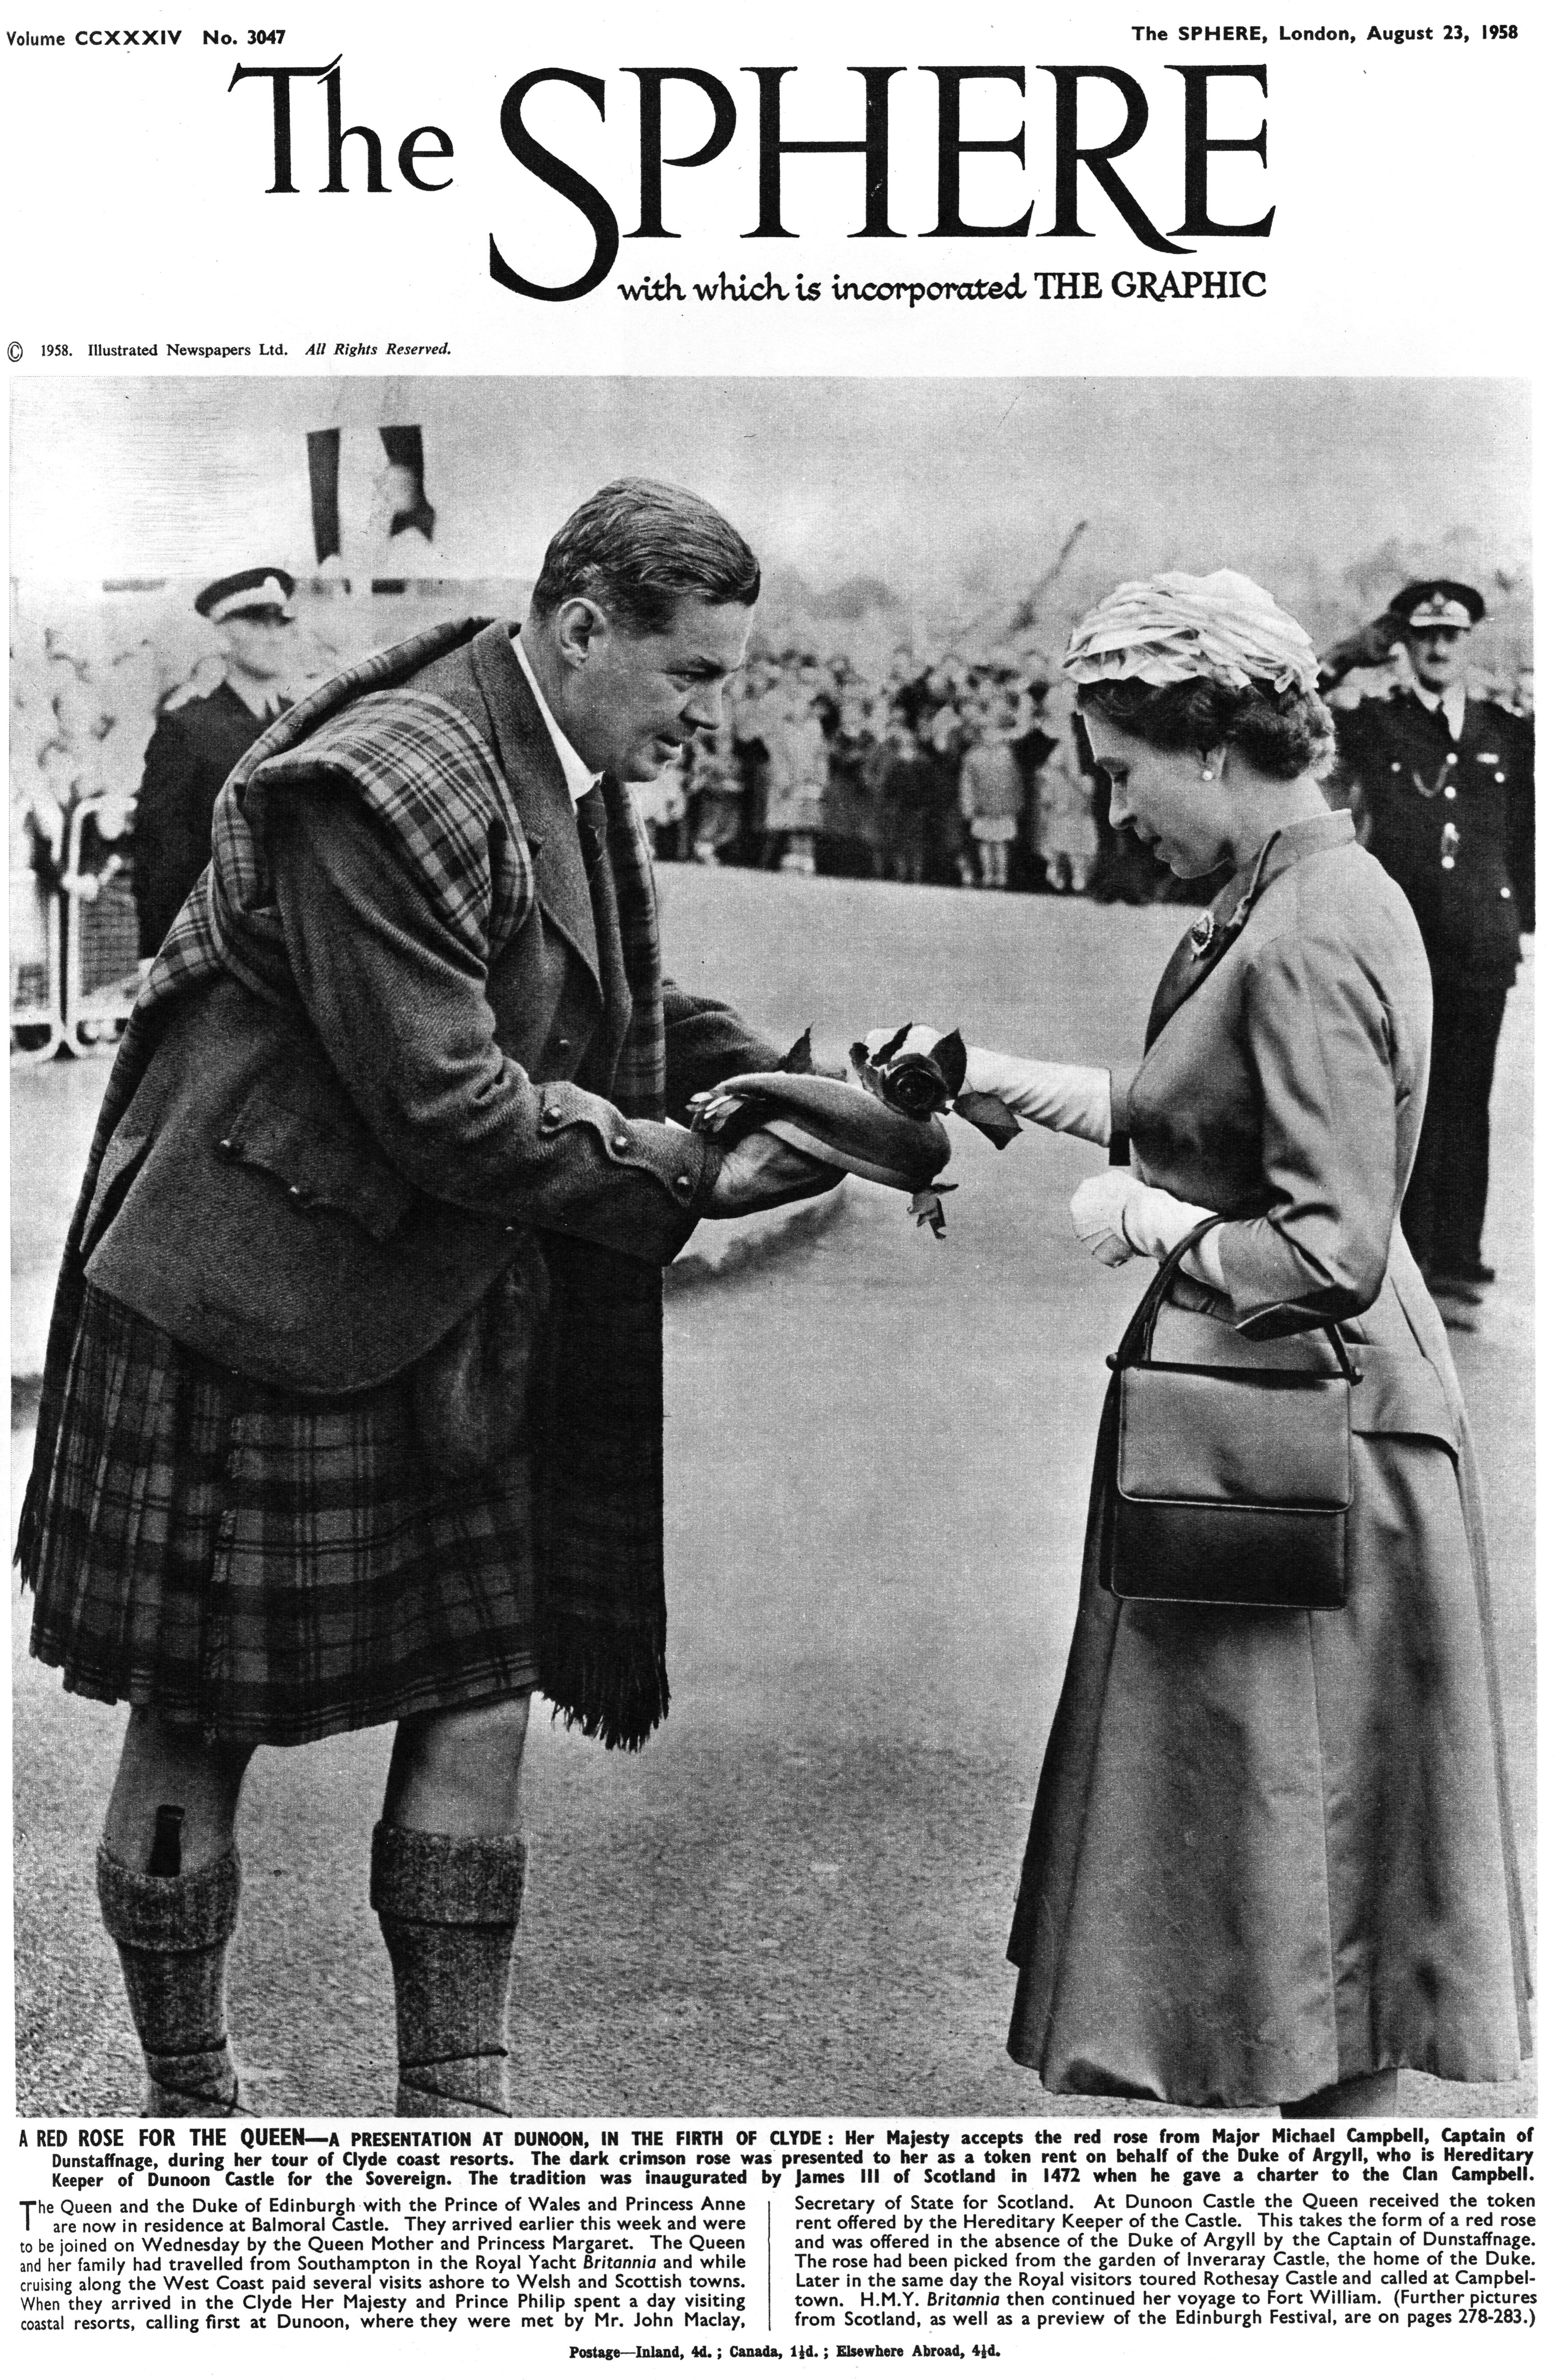 First Anniversary The Queen’s Death - Her Majesty accepts the red rose from Major Michael Campbell in 1958